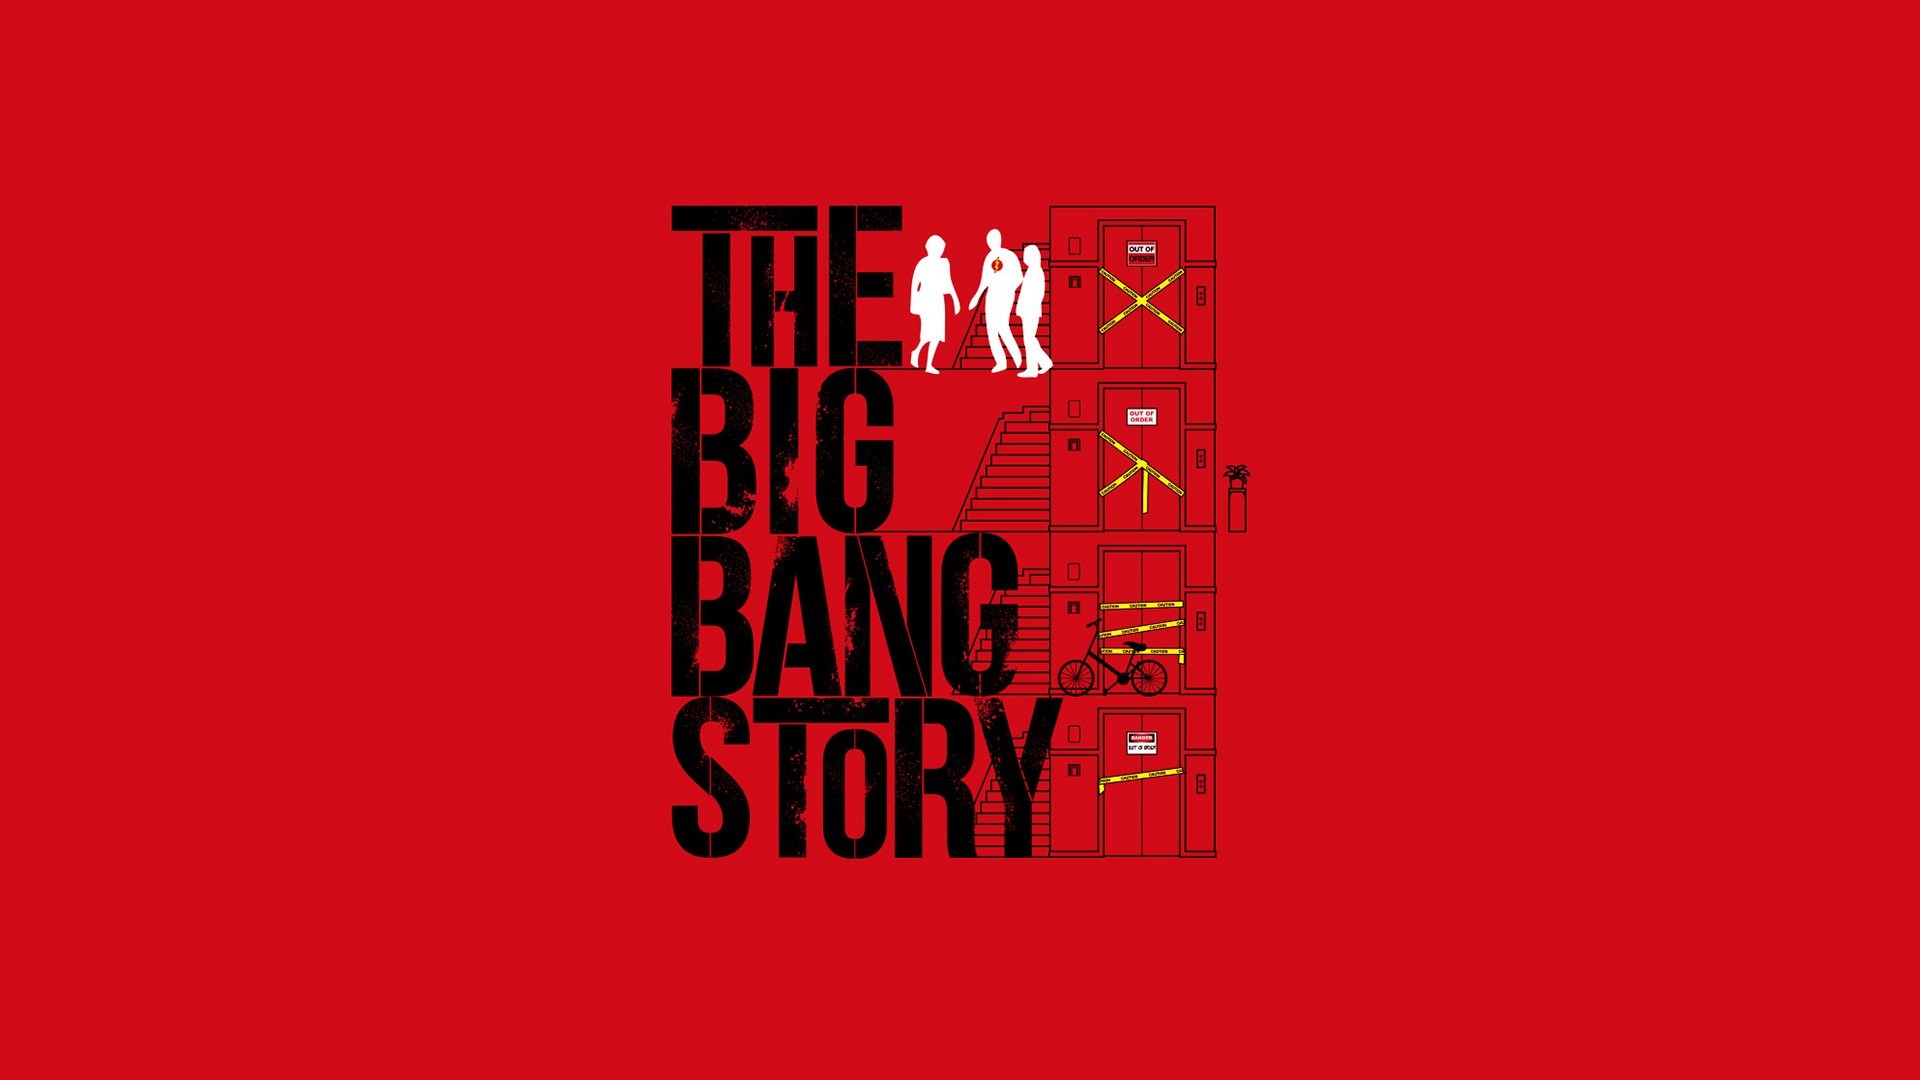 General 1920x1080 The Big Bang Theory TV series red background red simple background